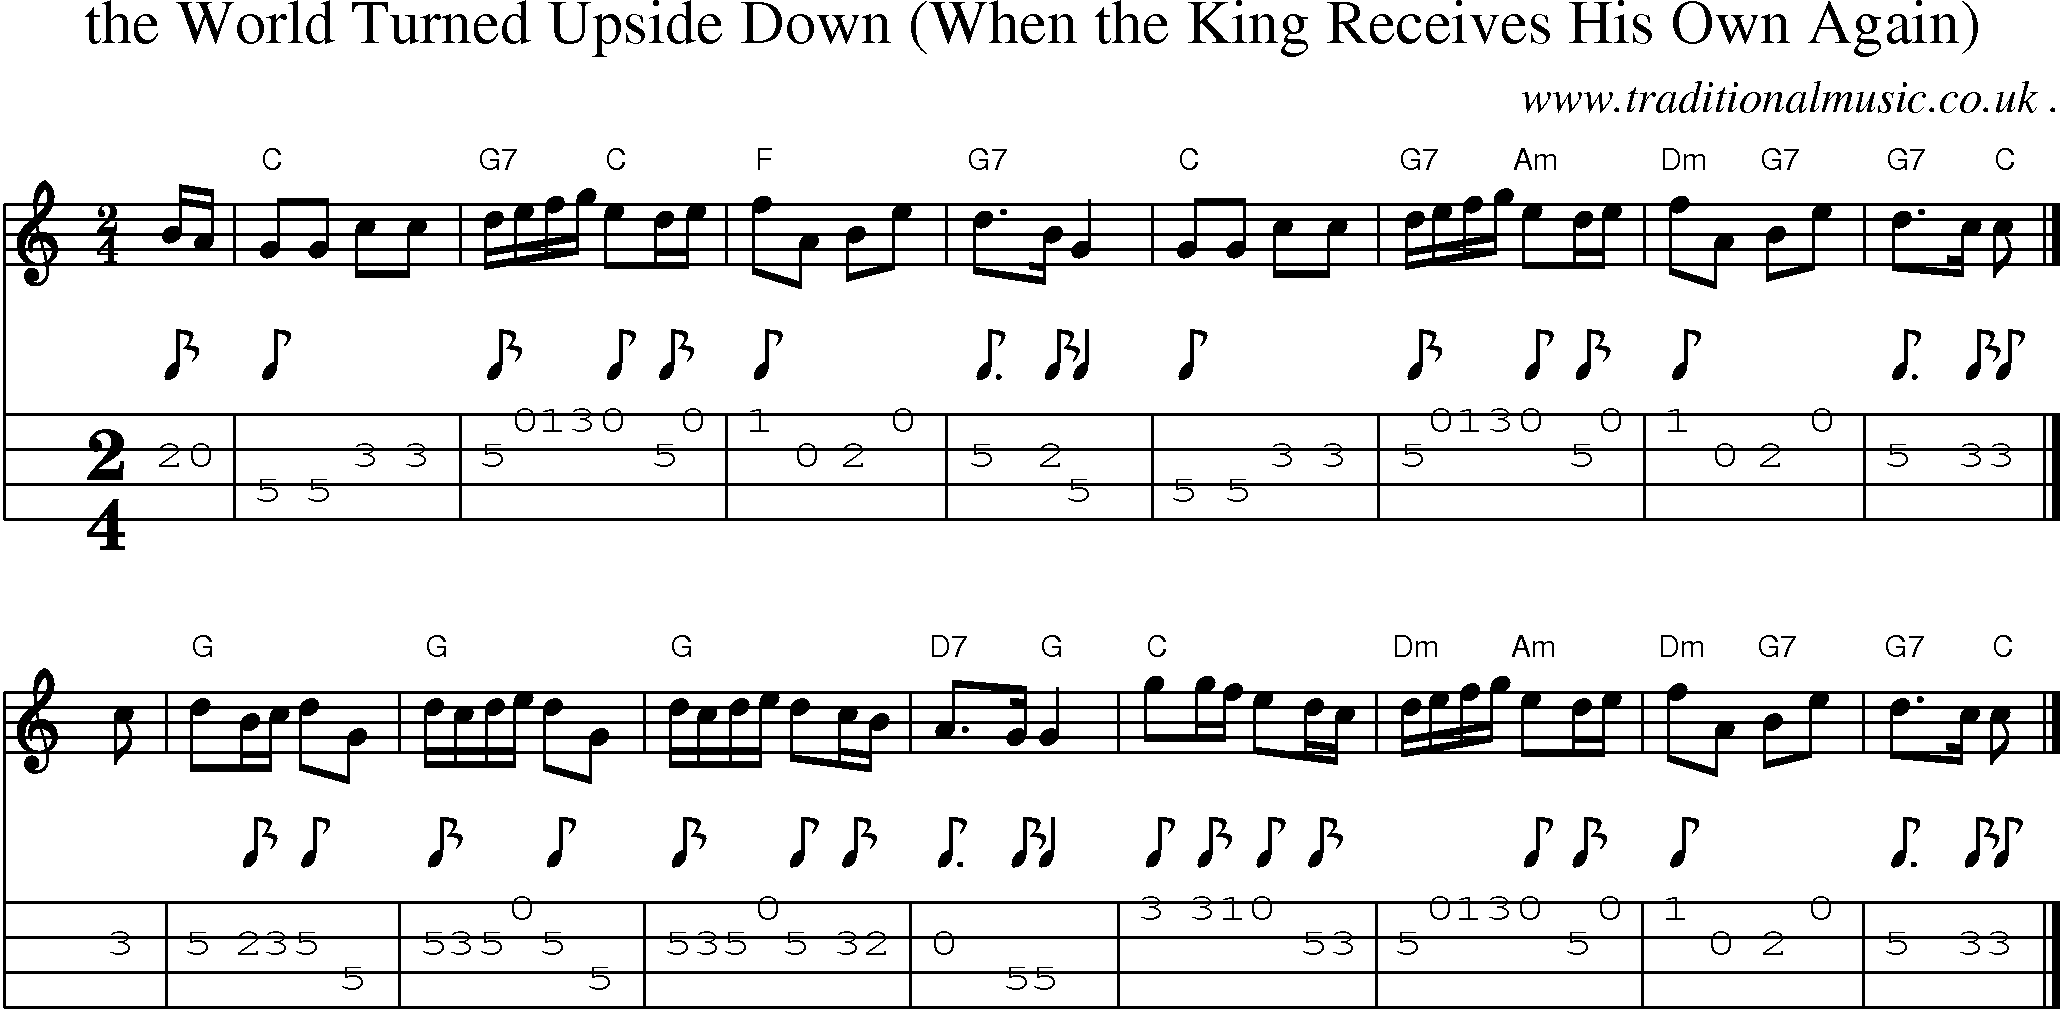 Sheet-music  score, Chords and Mandolin Tabs for The World Turned Upside Down When The King Receives His Own Again